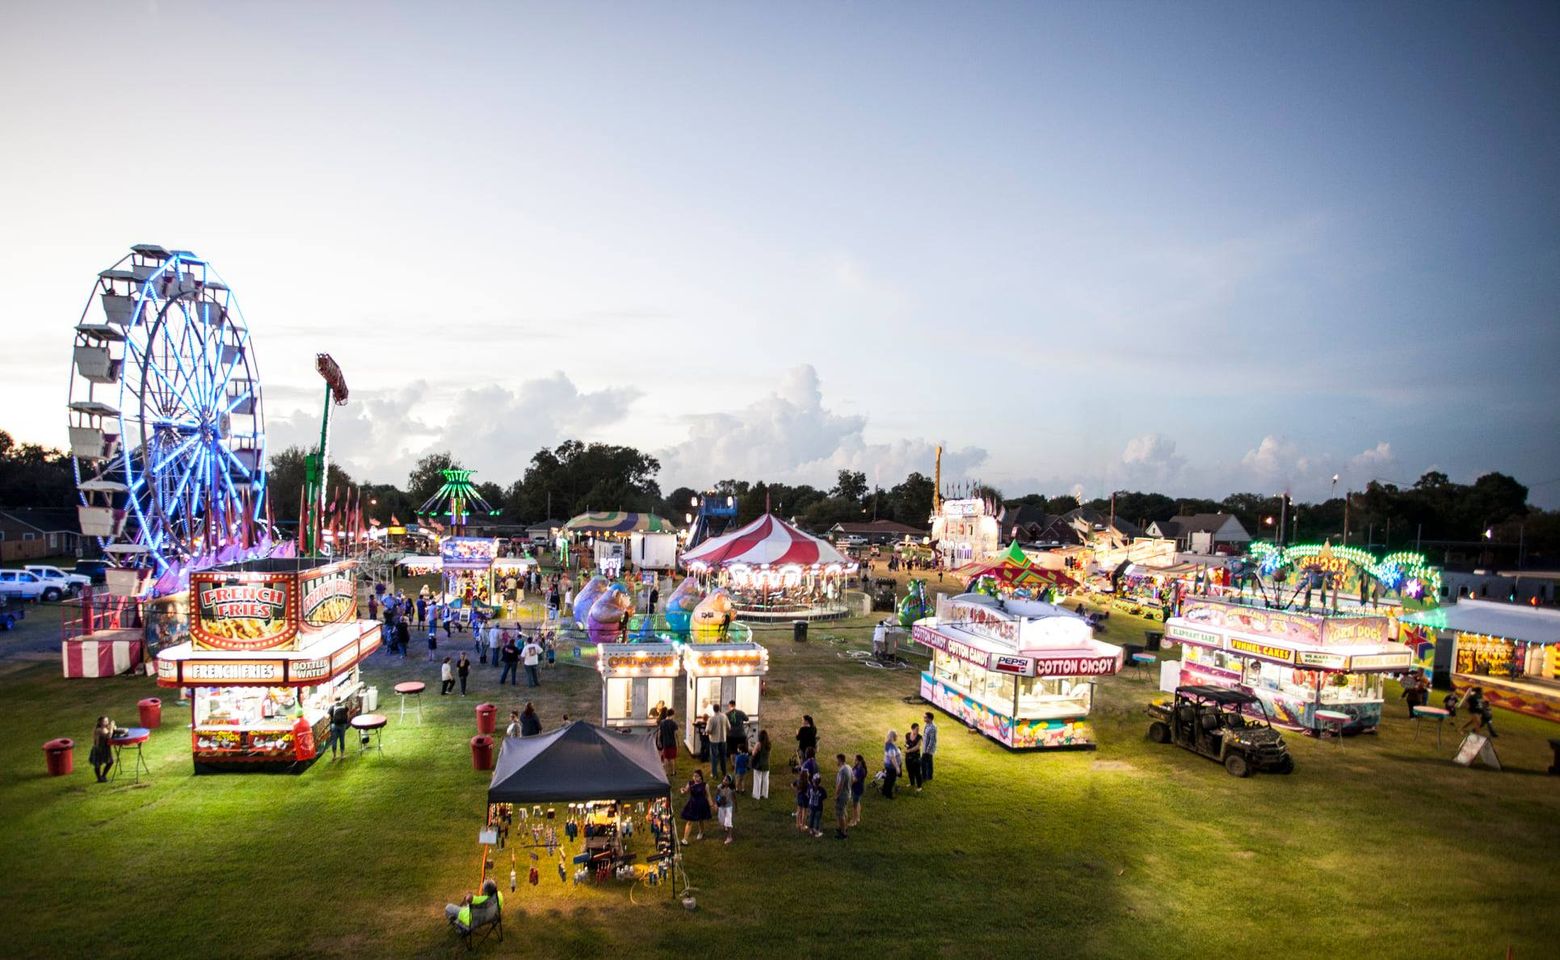 groves pecan festival grounds at night